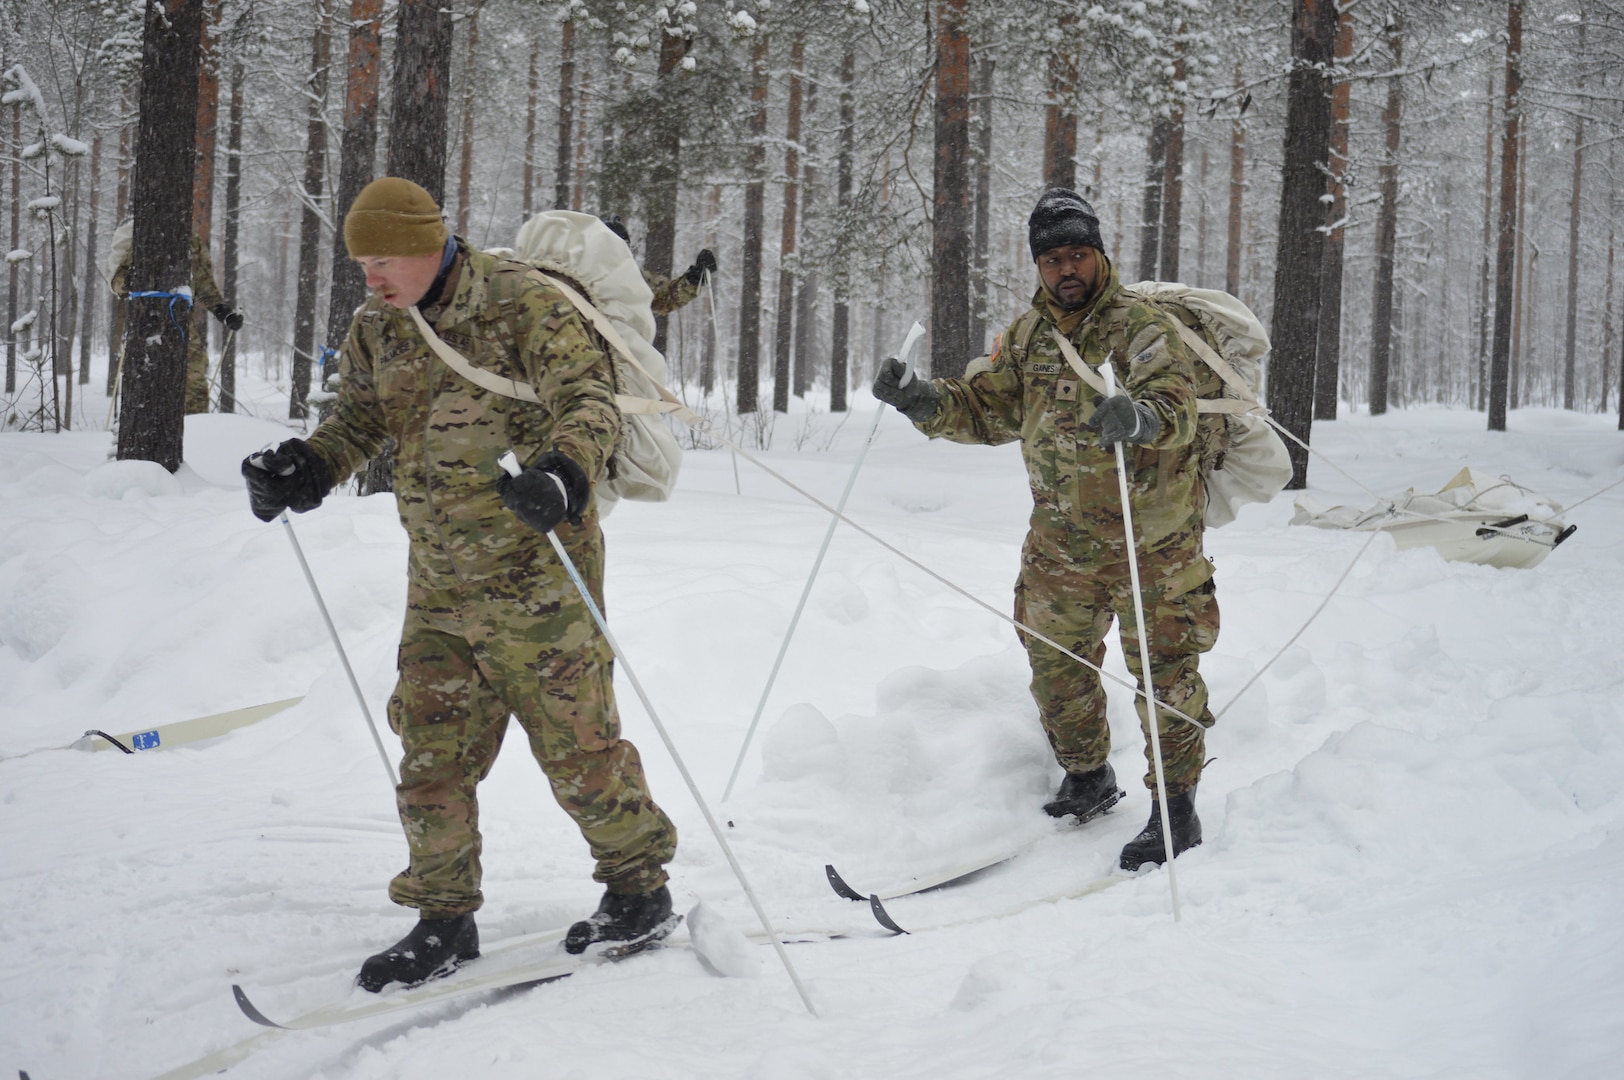 Virginia National Guard Soldiers assigned to the 2nd Squadron, 183rd Cavalry Regiment, 116th Infantry Brigade Combat Team, build extreme cold weather skills in advance of Exercise Arctic Forge 23 Feb. 19-20, 2023, in Sydonkyla, Finland. Exercise Arctic Forge 23 is a U.S. Army Europe and Africa led umbrella exercise that leverages the host-nation exercises Defense Exercise North in Finland, and exercise Joint Viking in Norway, focused on building capabilities and cooperation in support of the U.S. Army's Arctic Strategy.